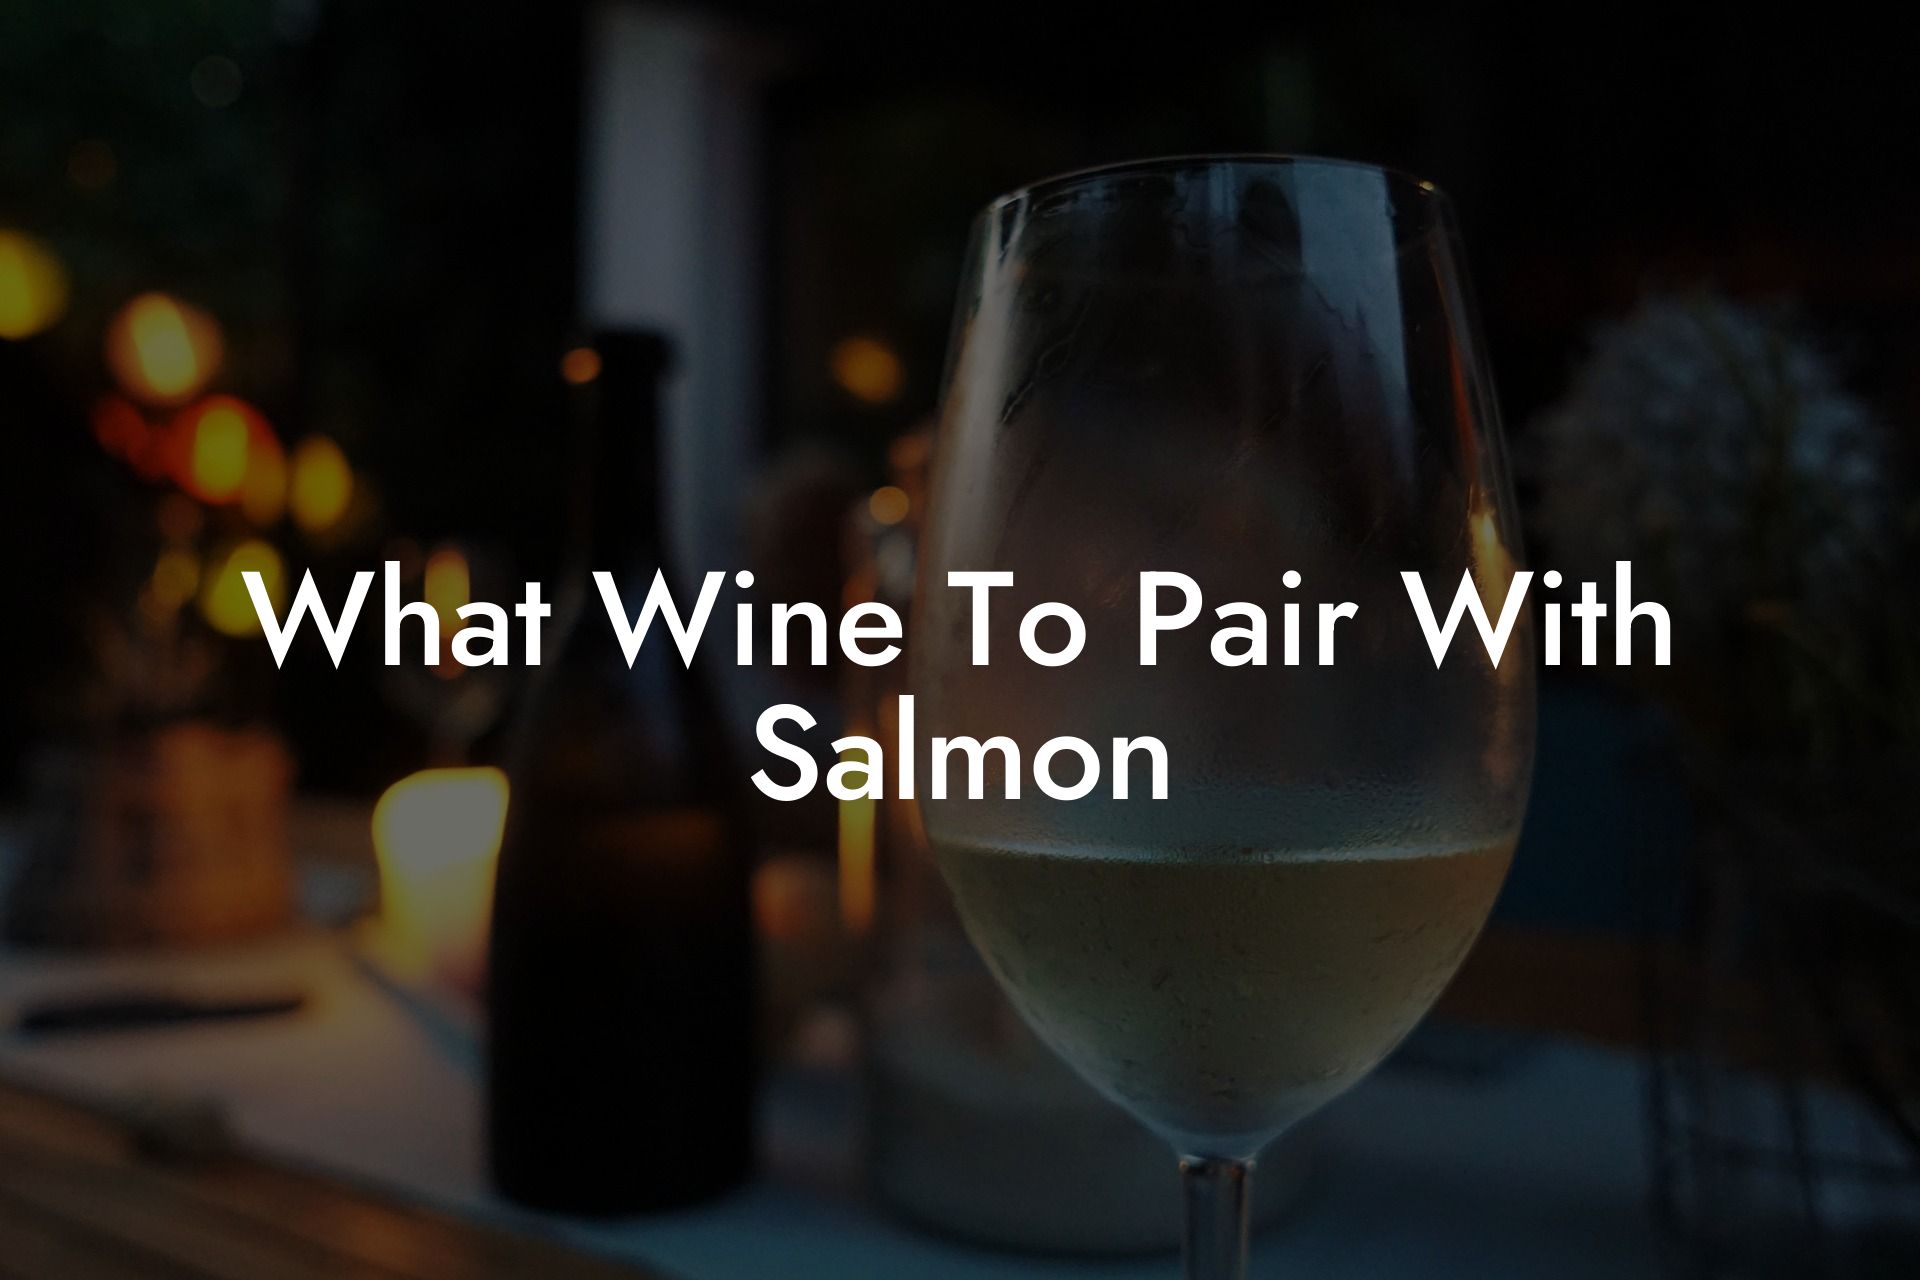 What Wine To Pair With Salmon